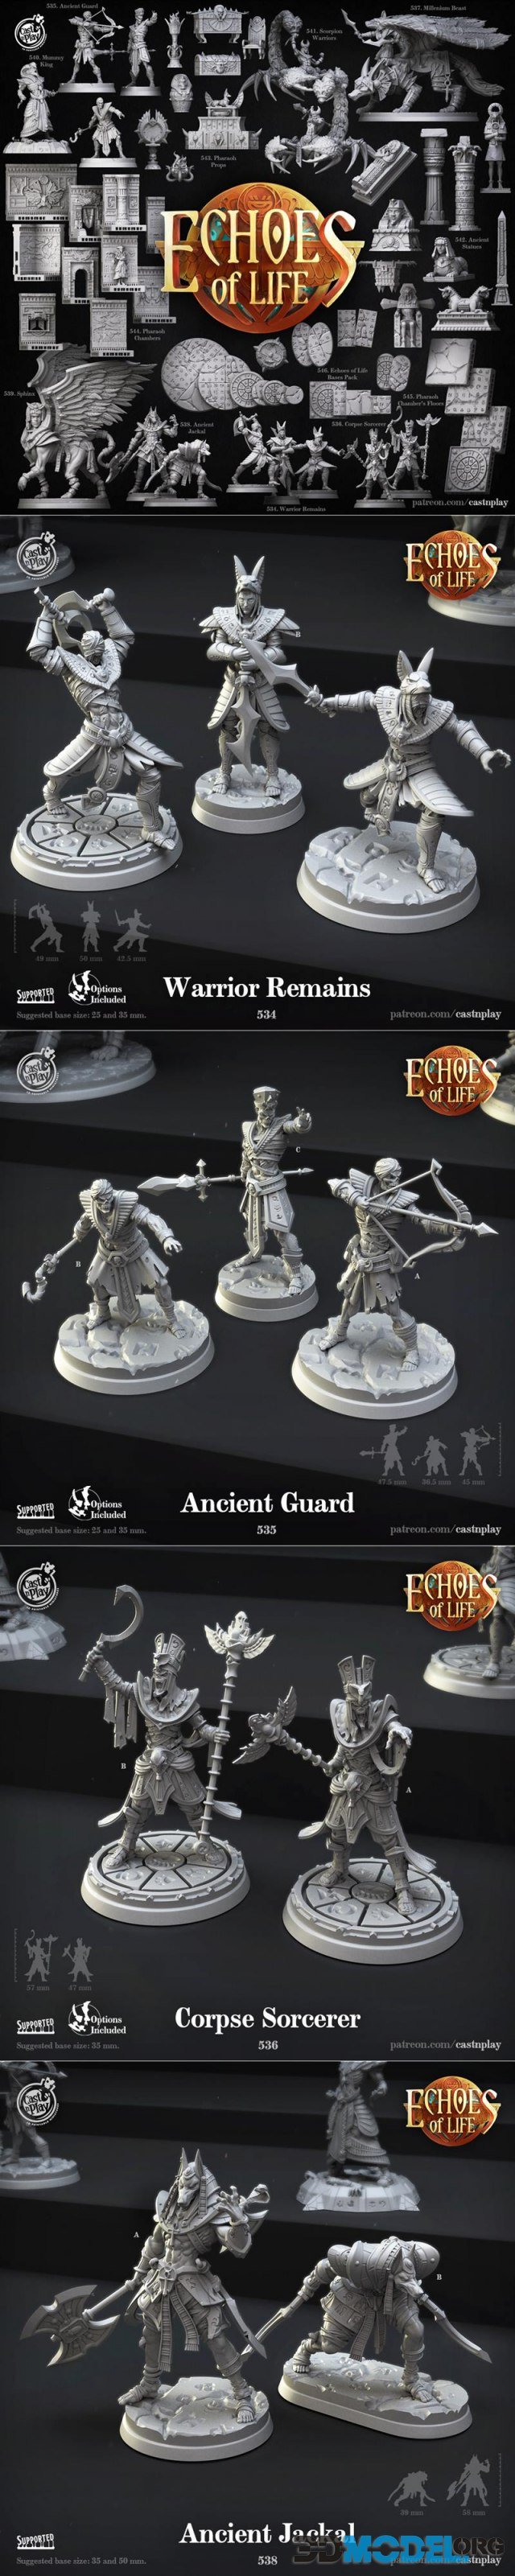 Cast N Play - Echoes of Life June 2022 – Printable